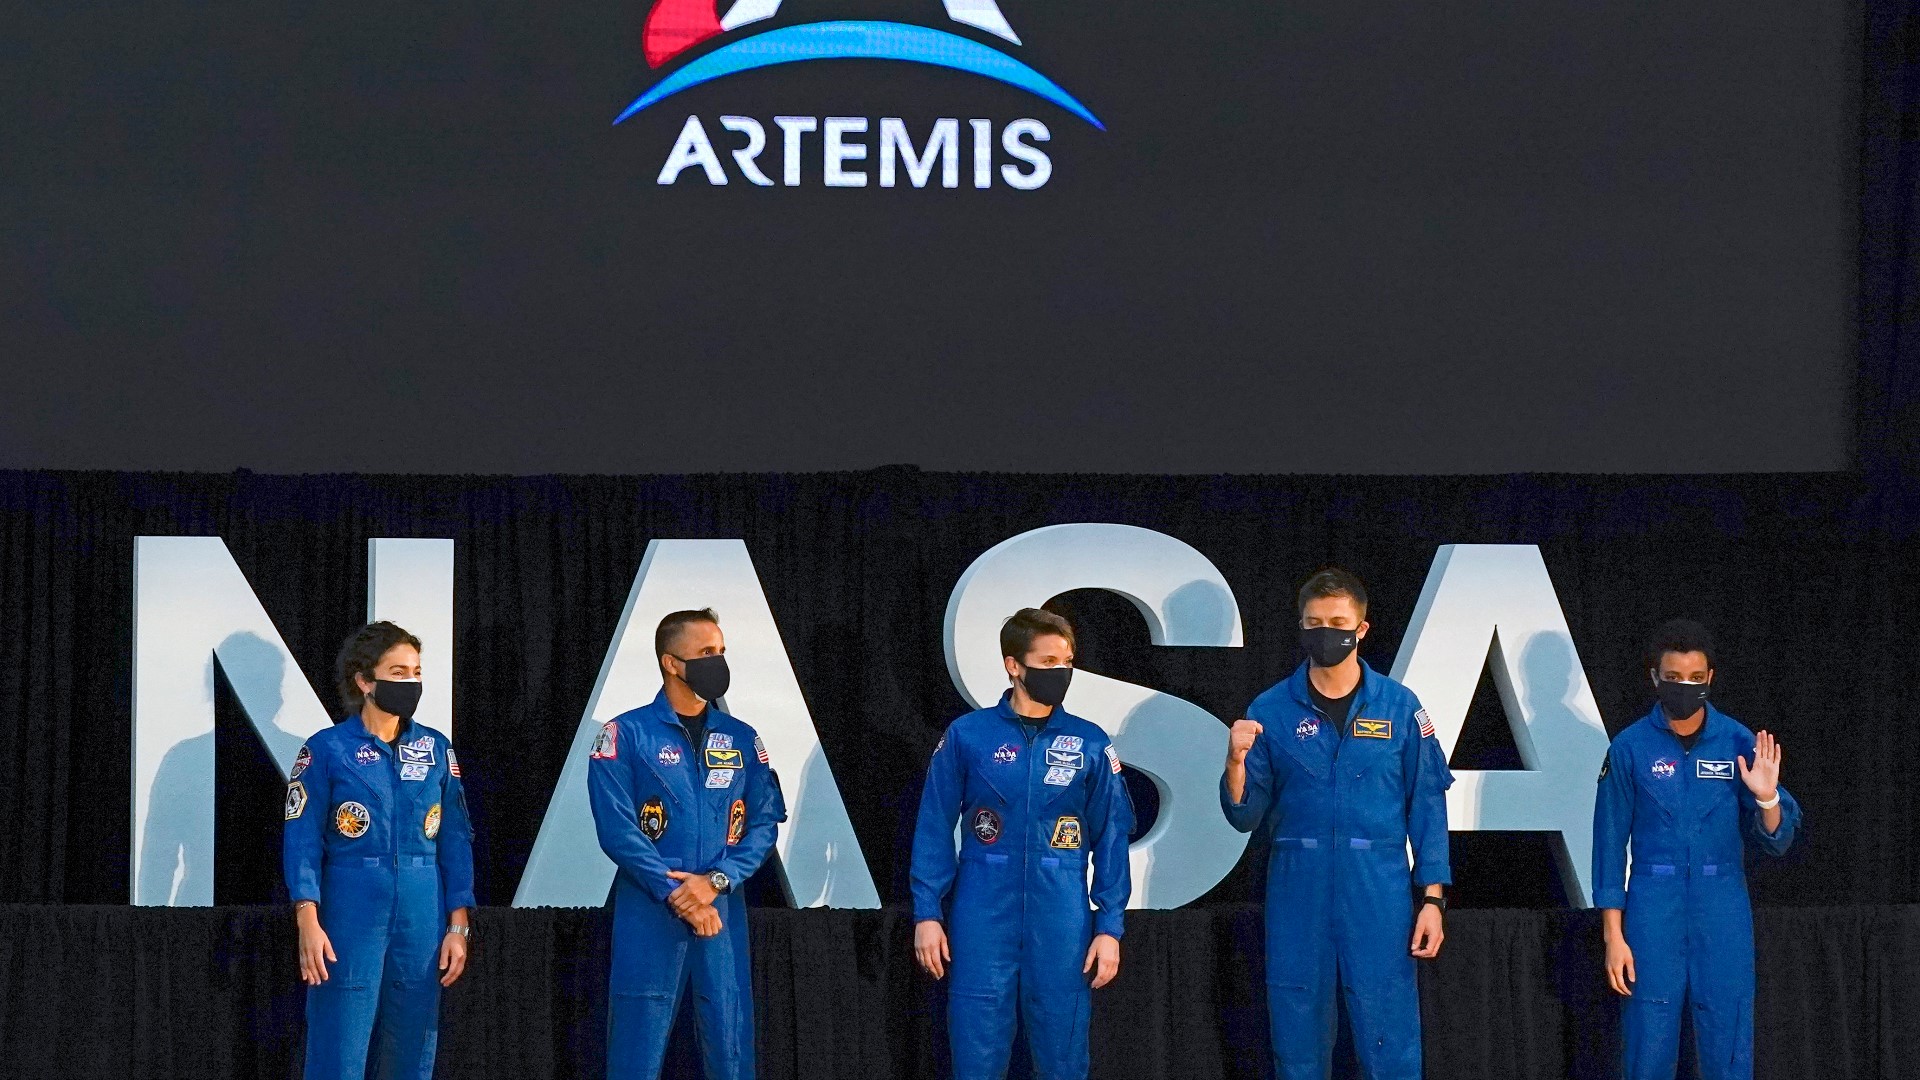 Four of the 18 astronauts selected to train to go to the moon graduated from San Diego universities.